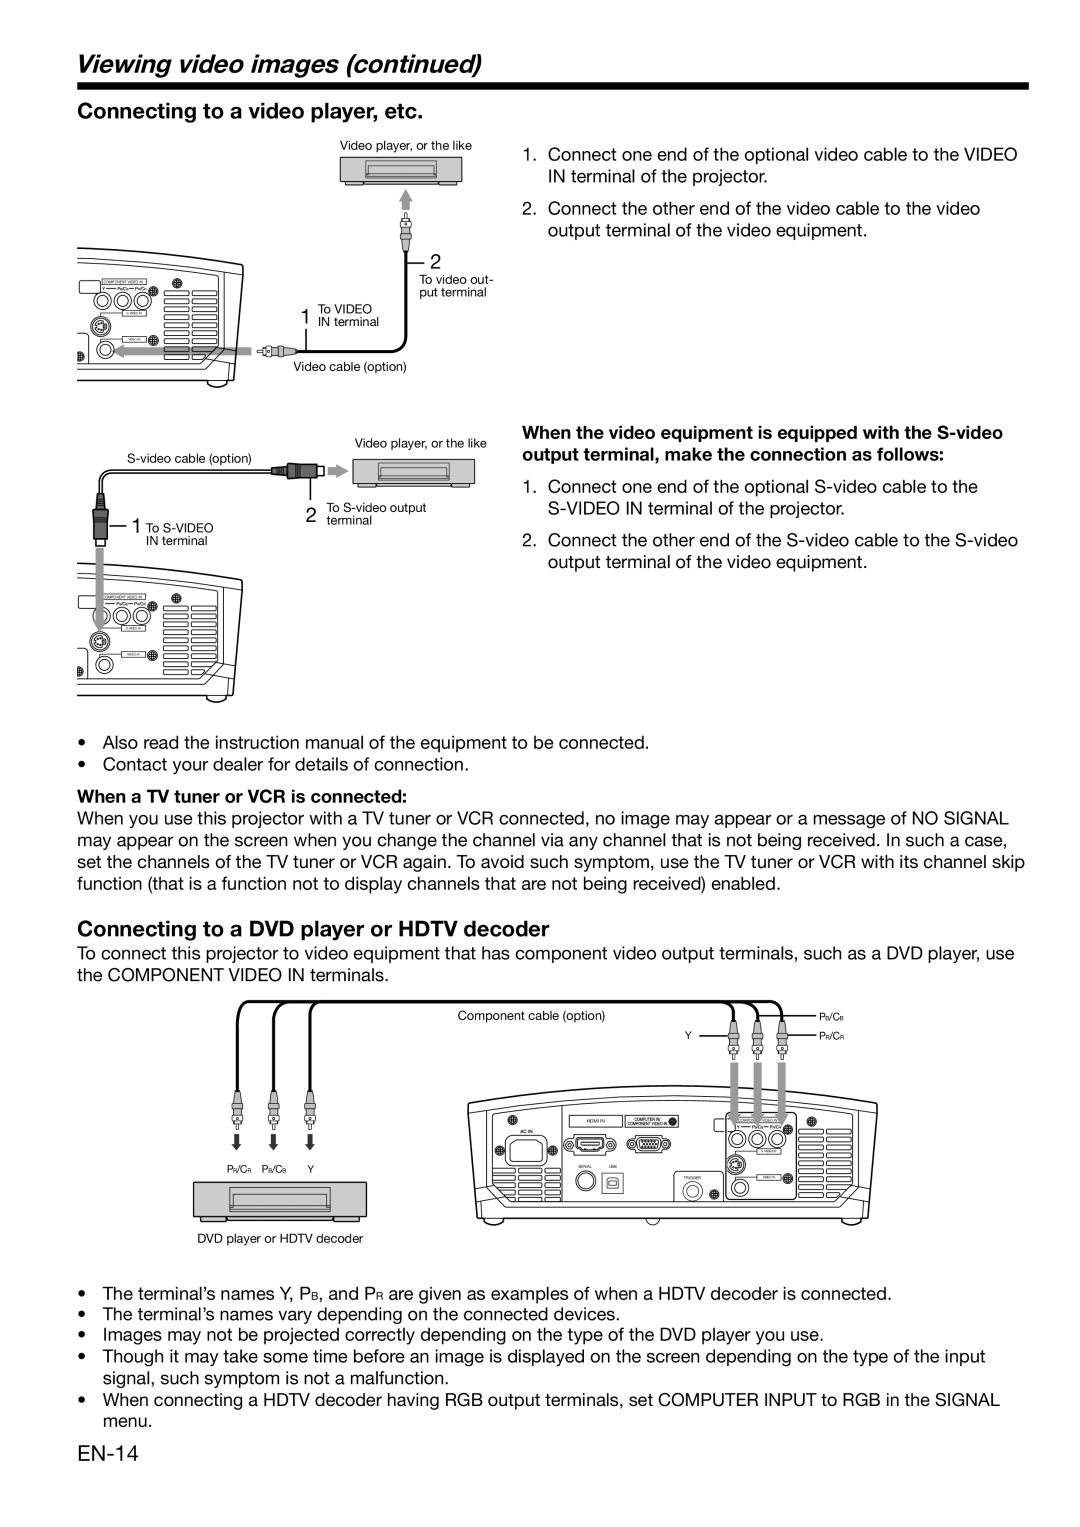 Mitsubishi Electronics HC3100 user manual Viewing video images continued, Connecting to a video player, etc 